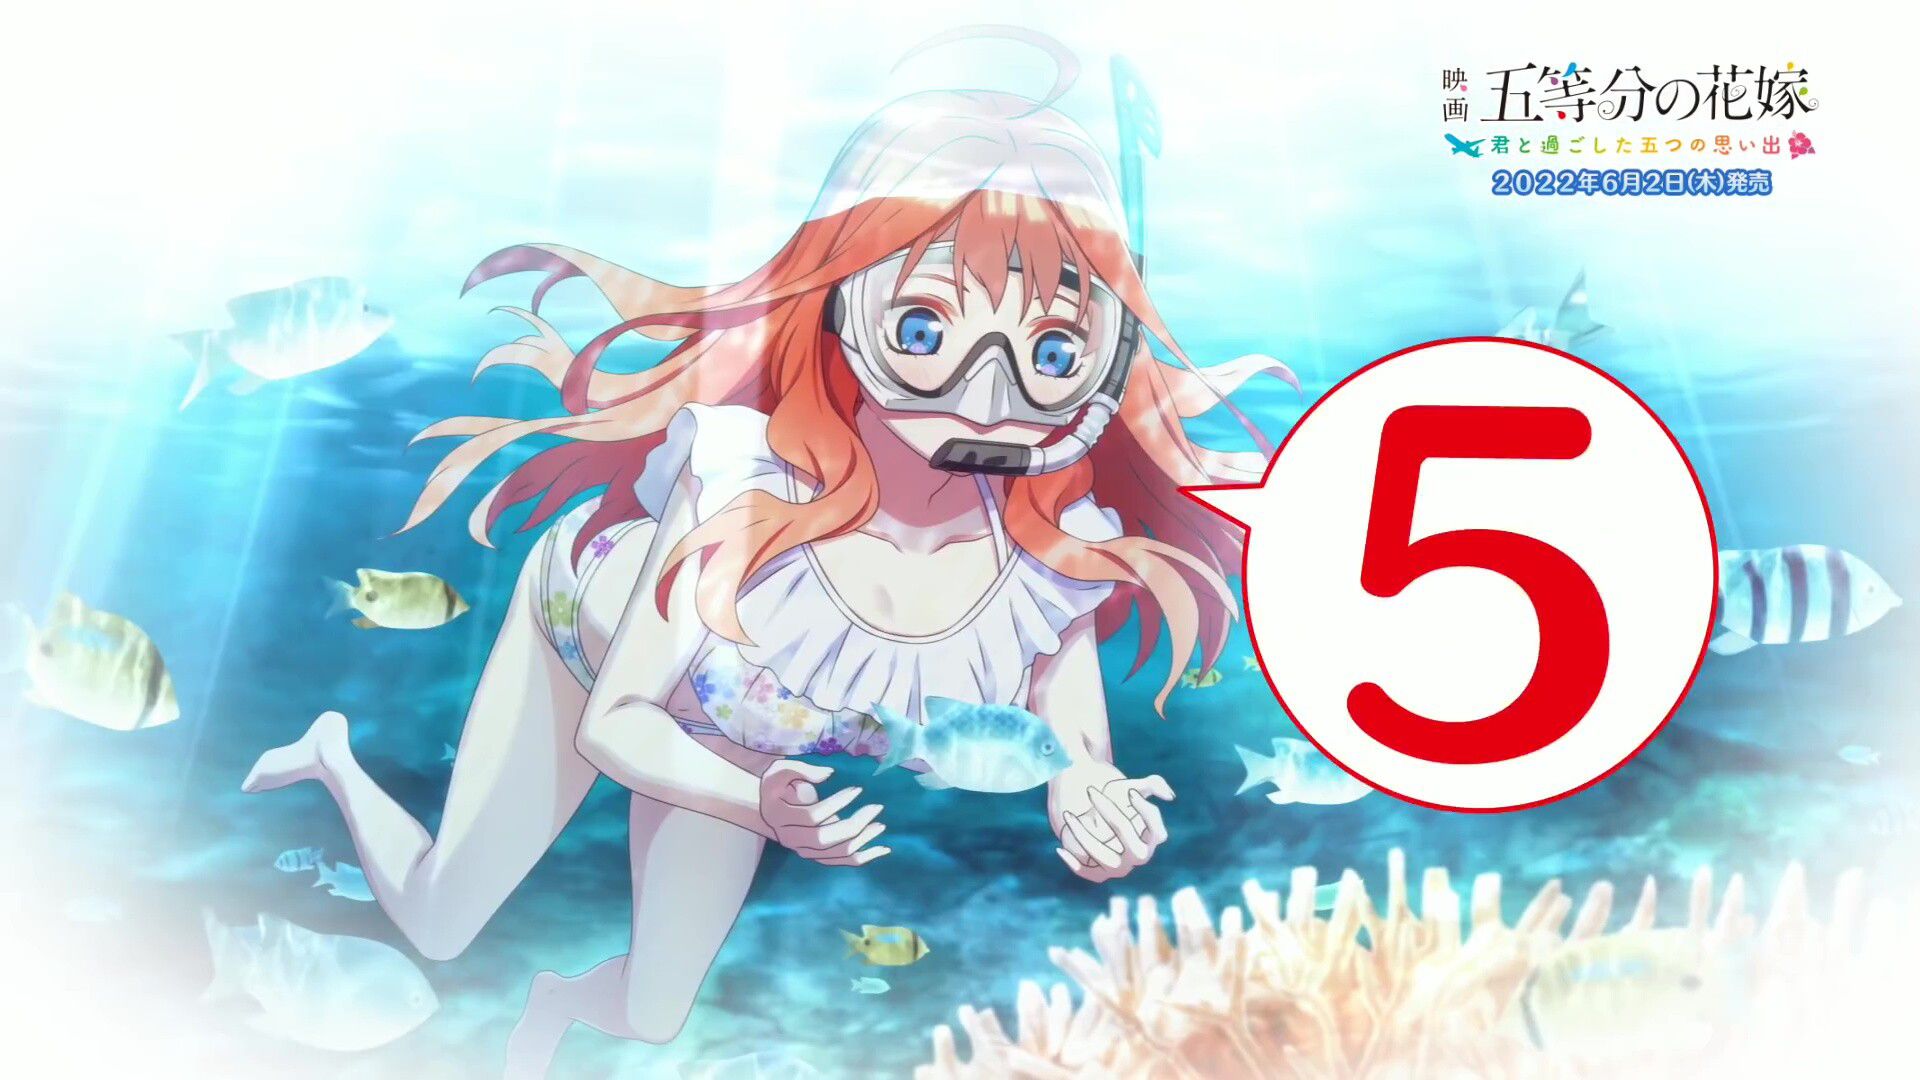 PS4 / Switch "Movie "Five Memories Of Five Equals" - Five Memories Spent With You" Girls' Erotic Swimsuits, etc. 31